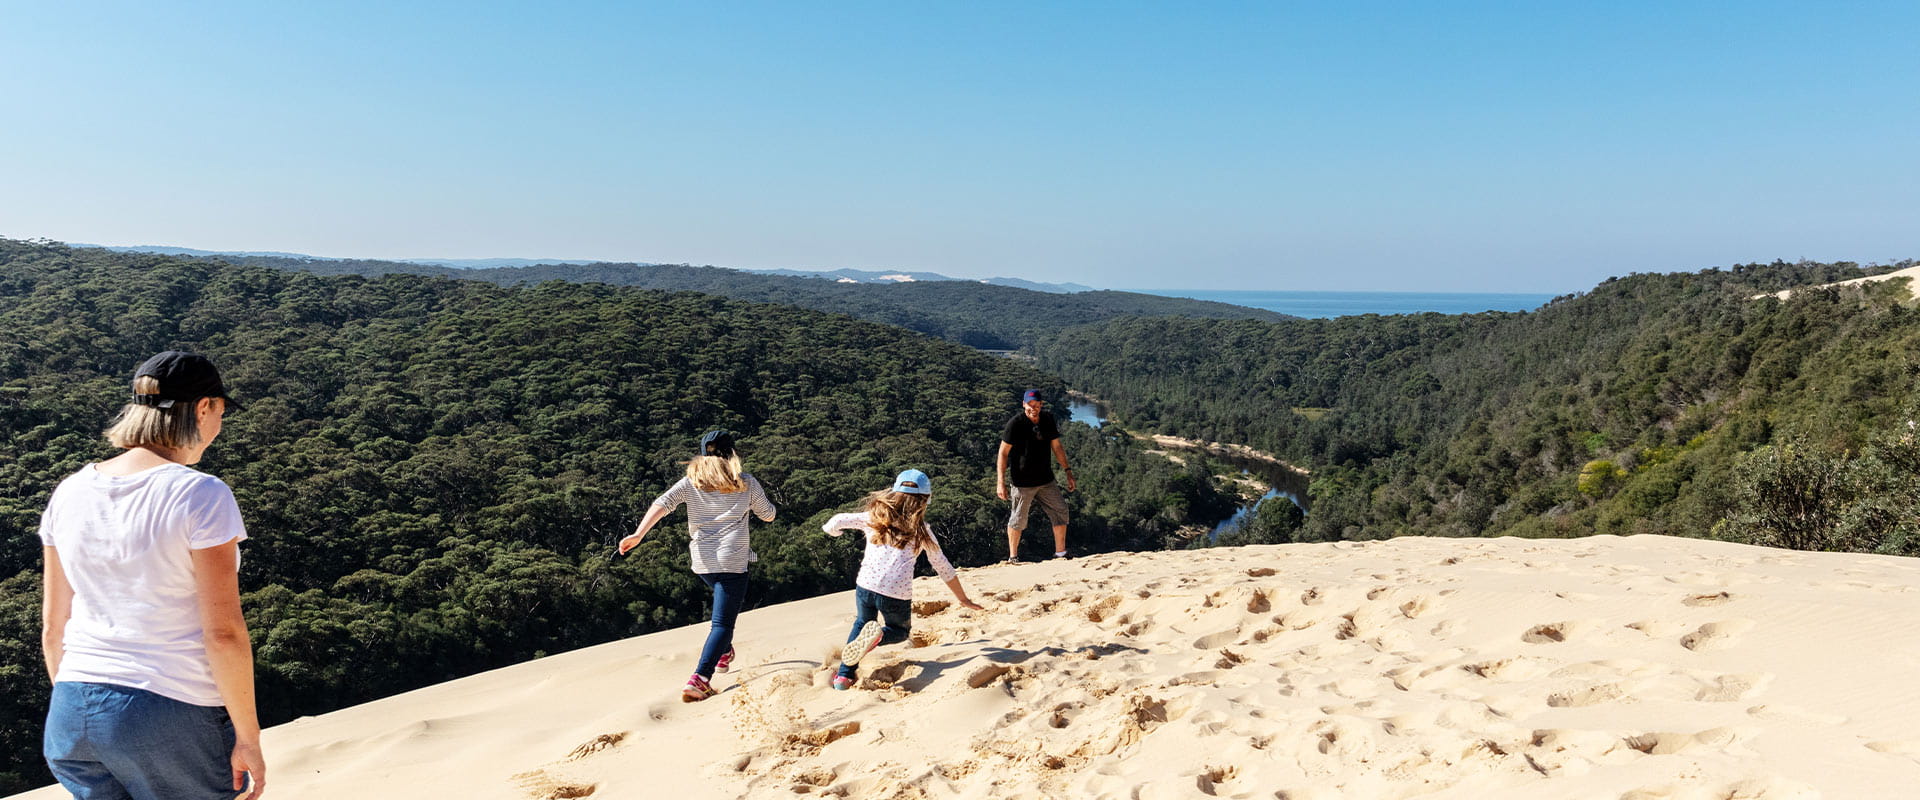 Two young girls run towards their dad on a sand dune above a river and the ocean far in the background